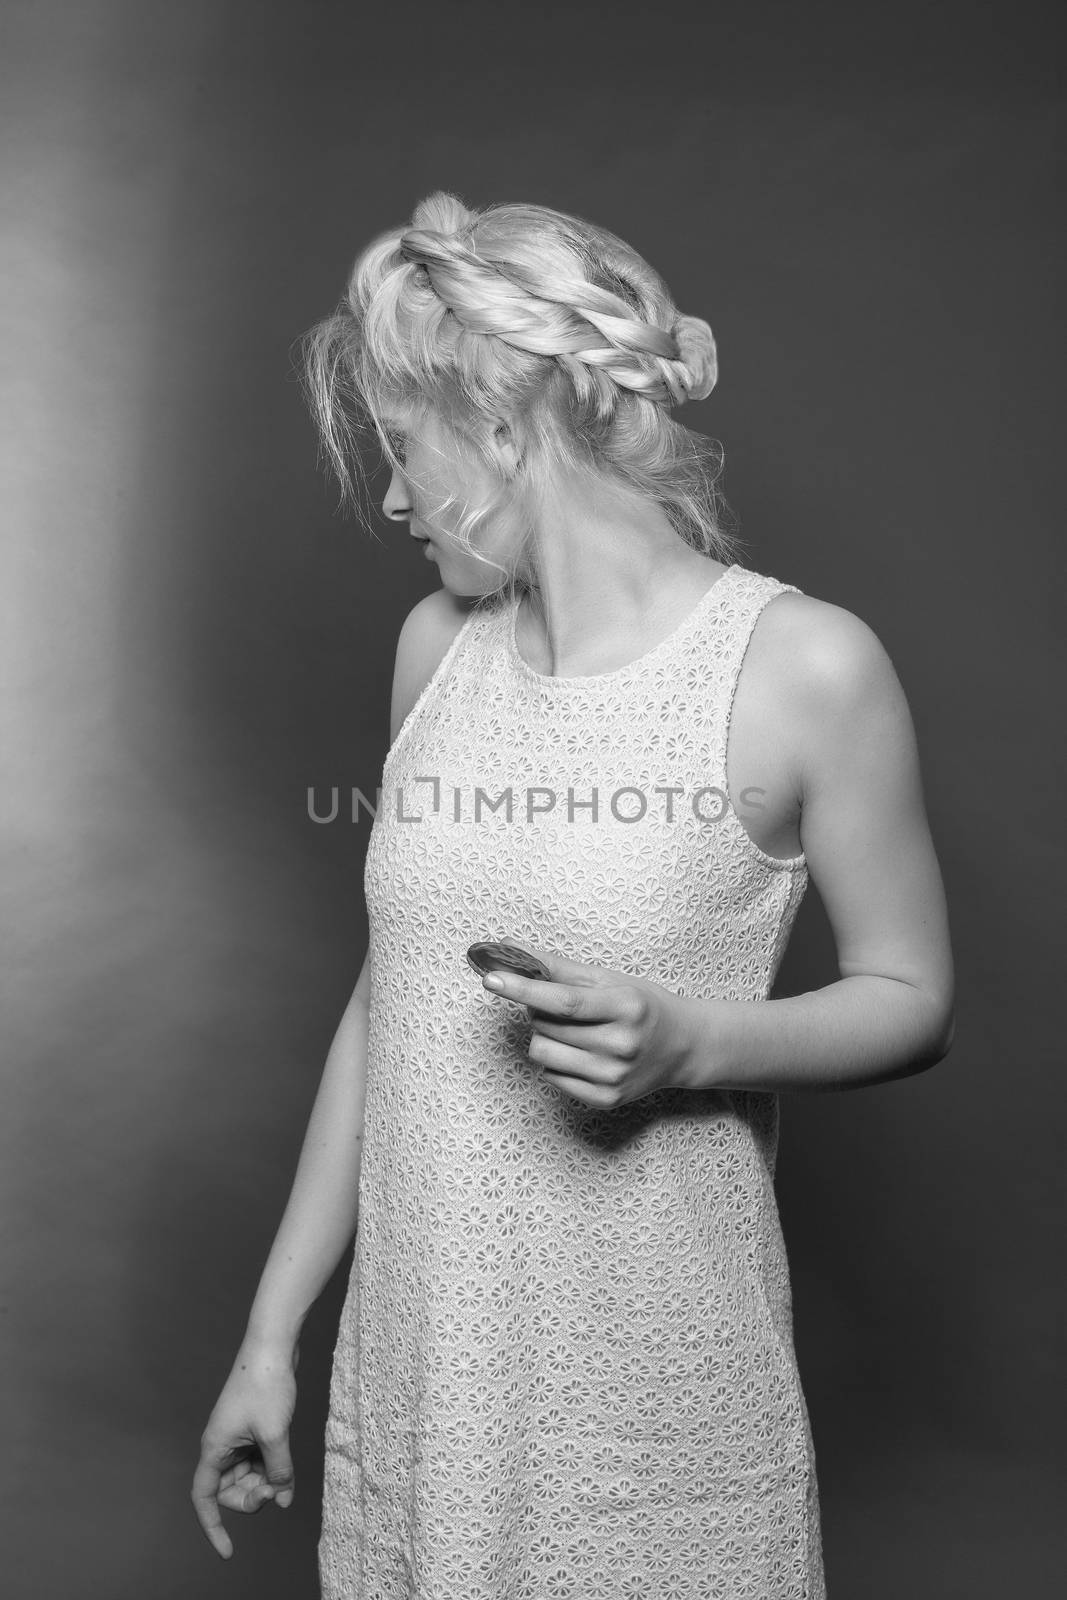 Blonde girl in mini dress and stylish hairstyle with biscuit in hand looks back over her shoulder by STphotography